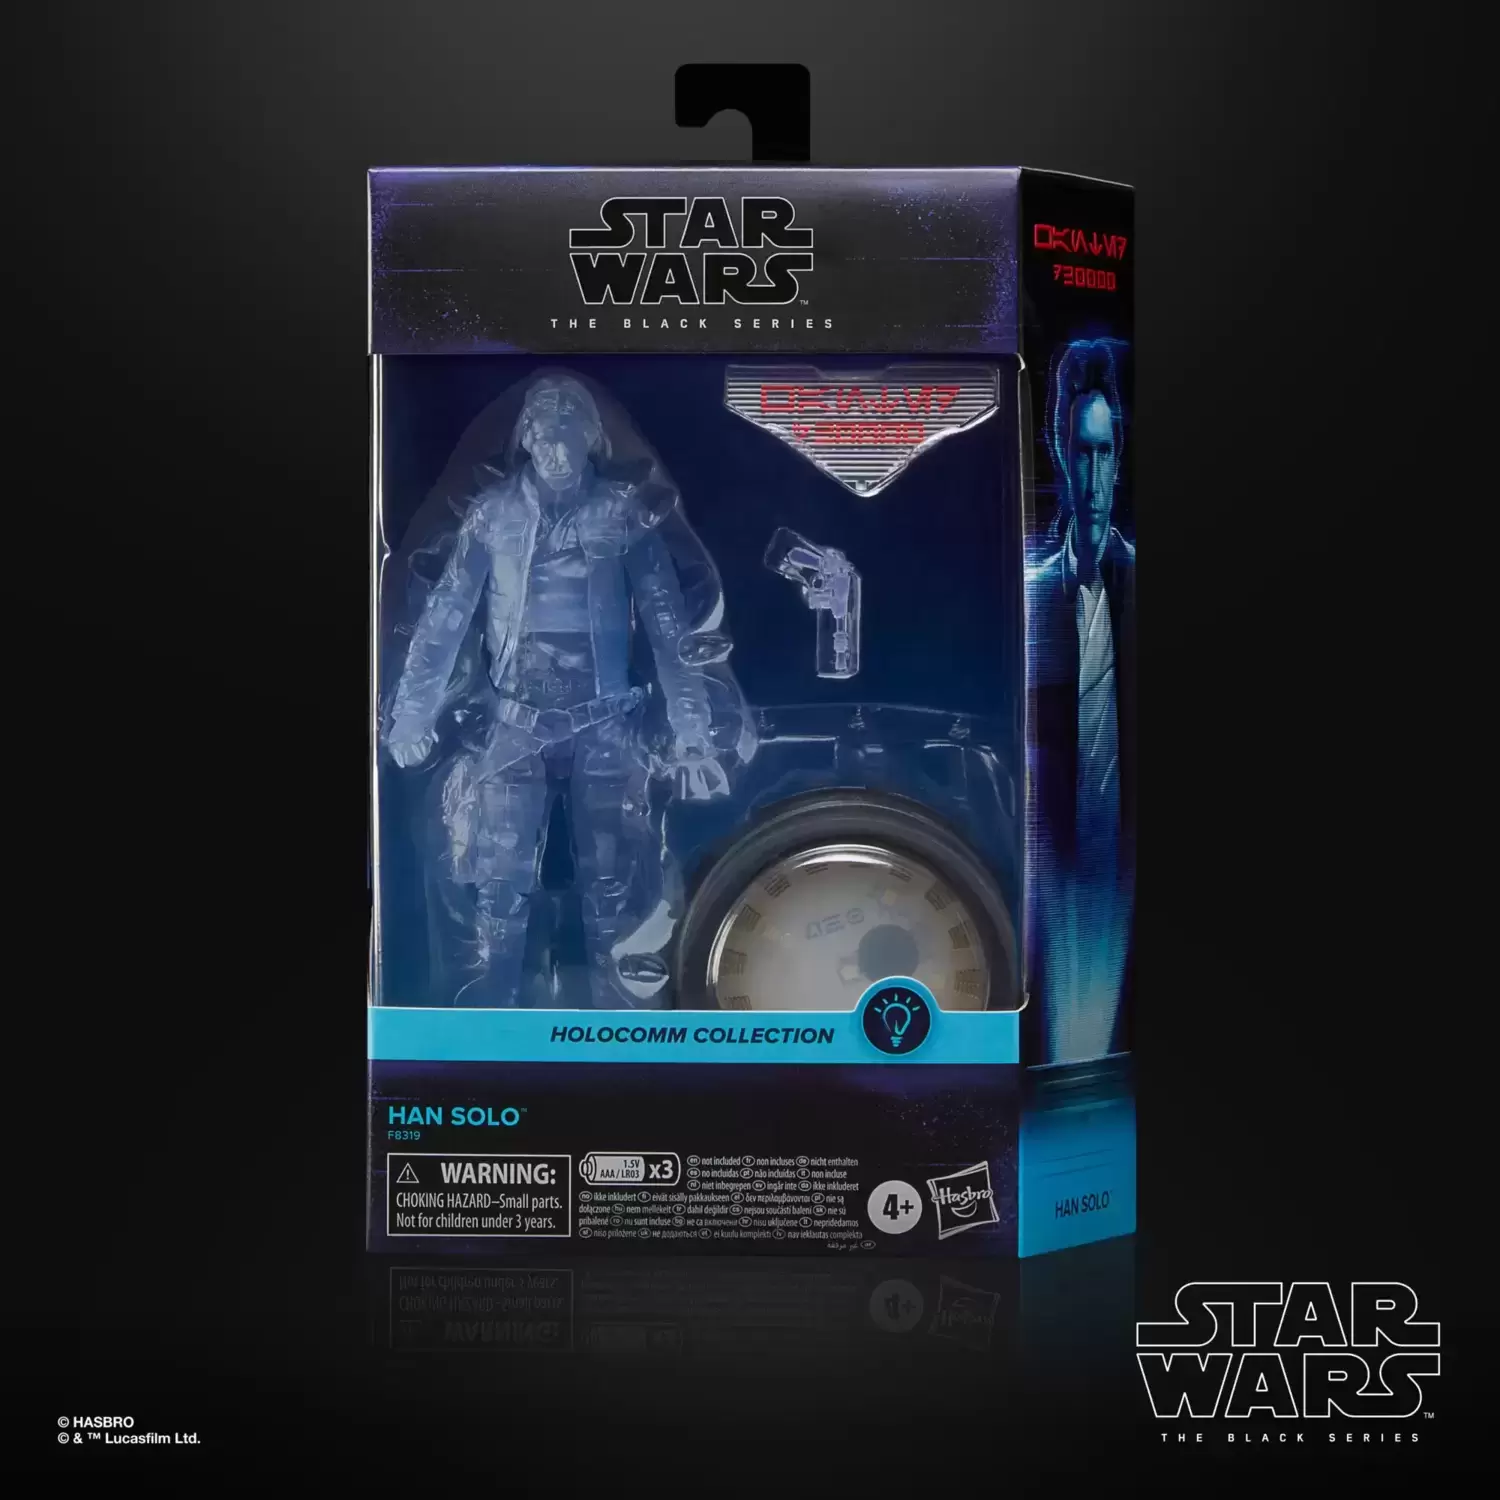 The Black Series - Colored Box - Han Solo  - Holocomm Collection